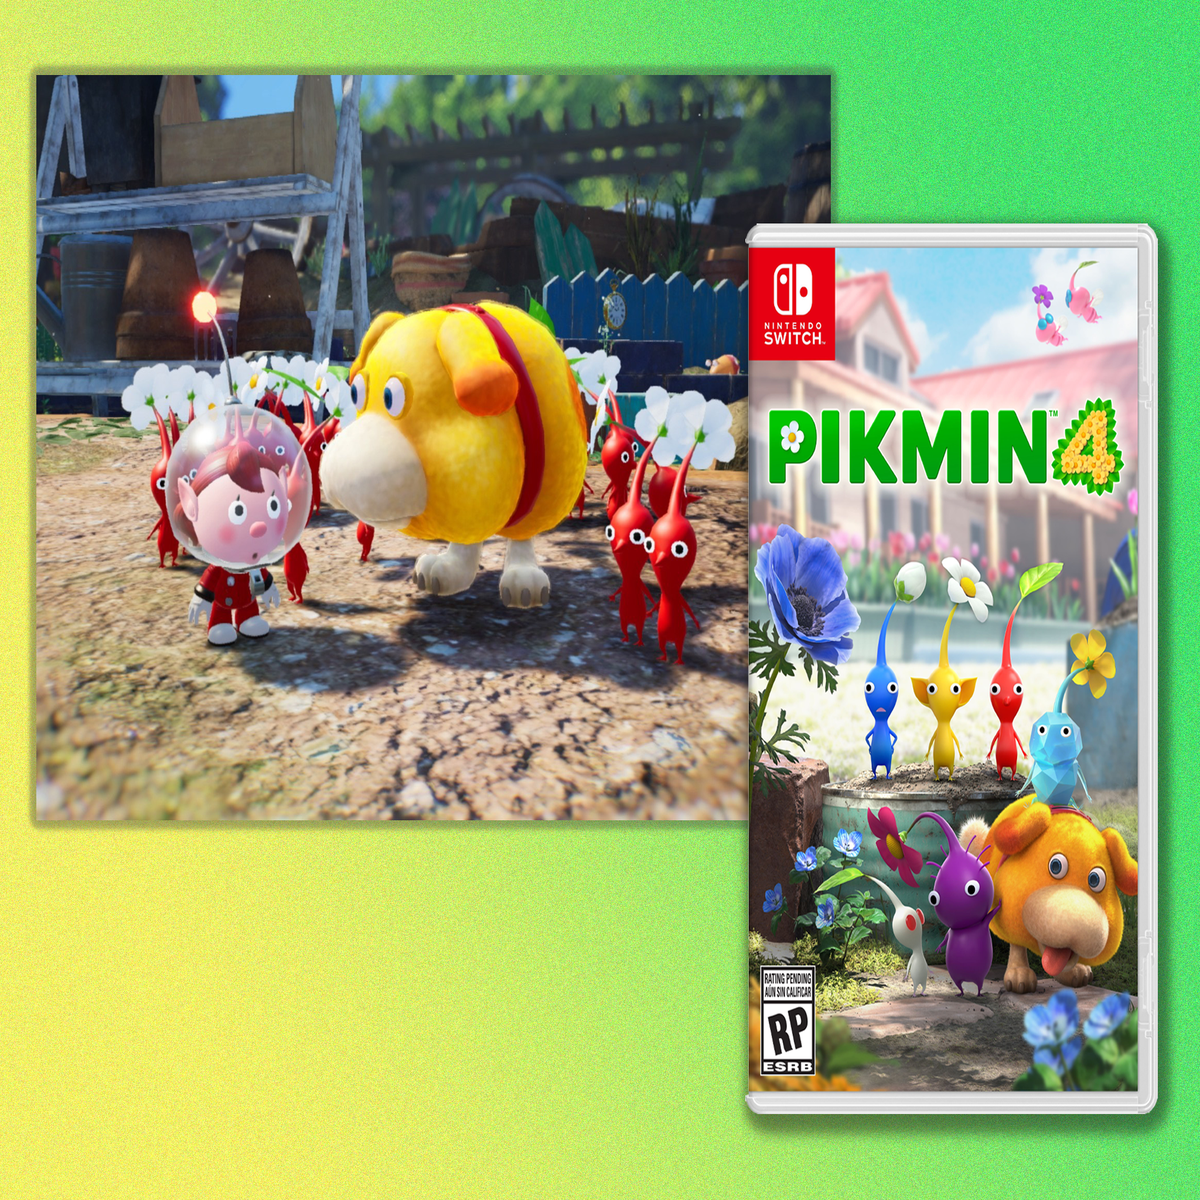 4 The and Pikmin release bonuses Where date: | Independent best deals buy and the to